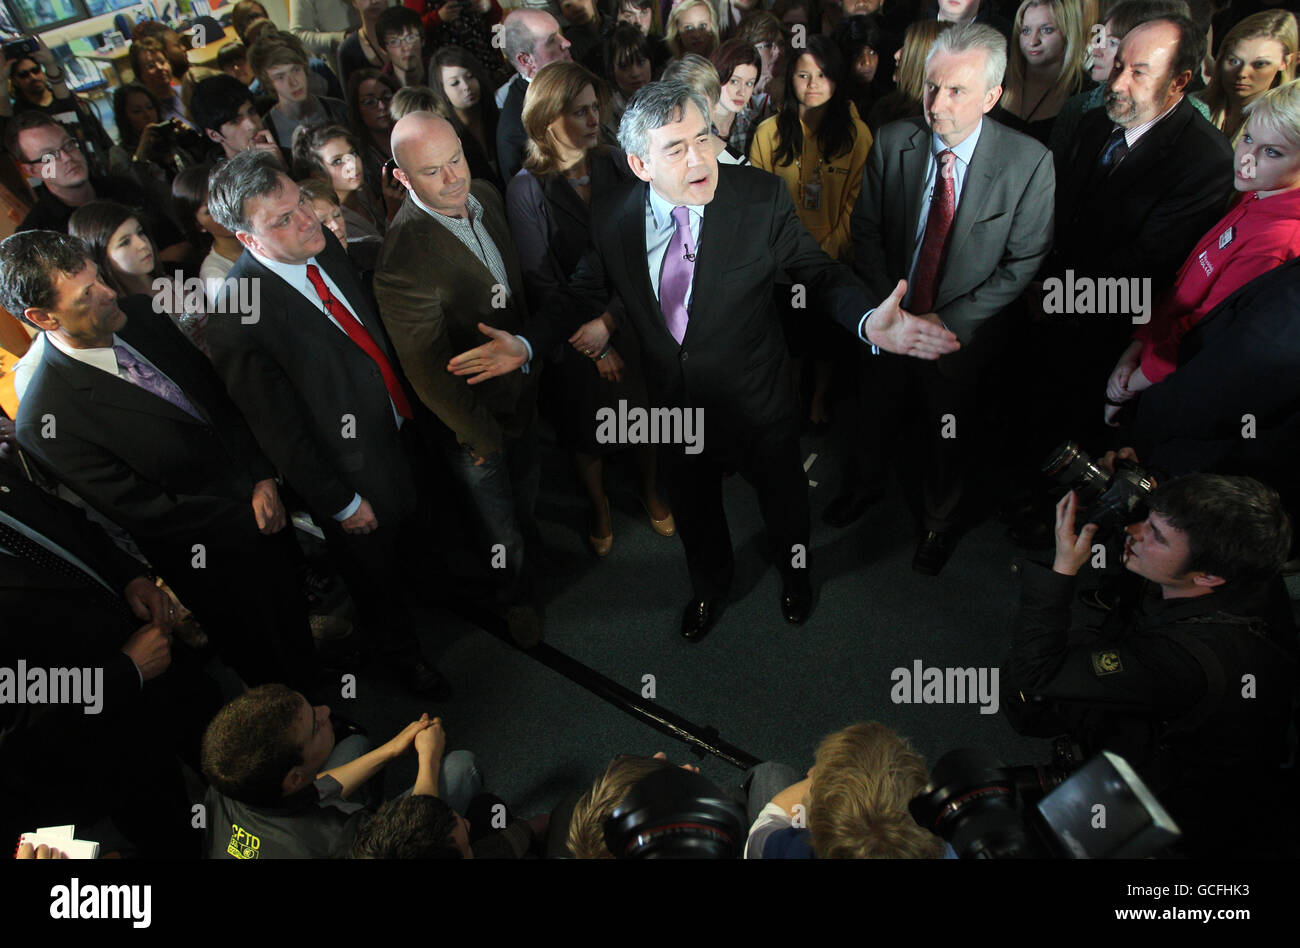 Prime Minister Gordon Brown is joined by his wife Sarah, Schools secretary Ed Balls (second left) and Ross Kemp (third left) as he speaks to students at Warwickshire College in Leamington Spa, during a day of General Election campaigning across the country. Stock Photo